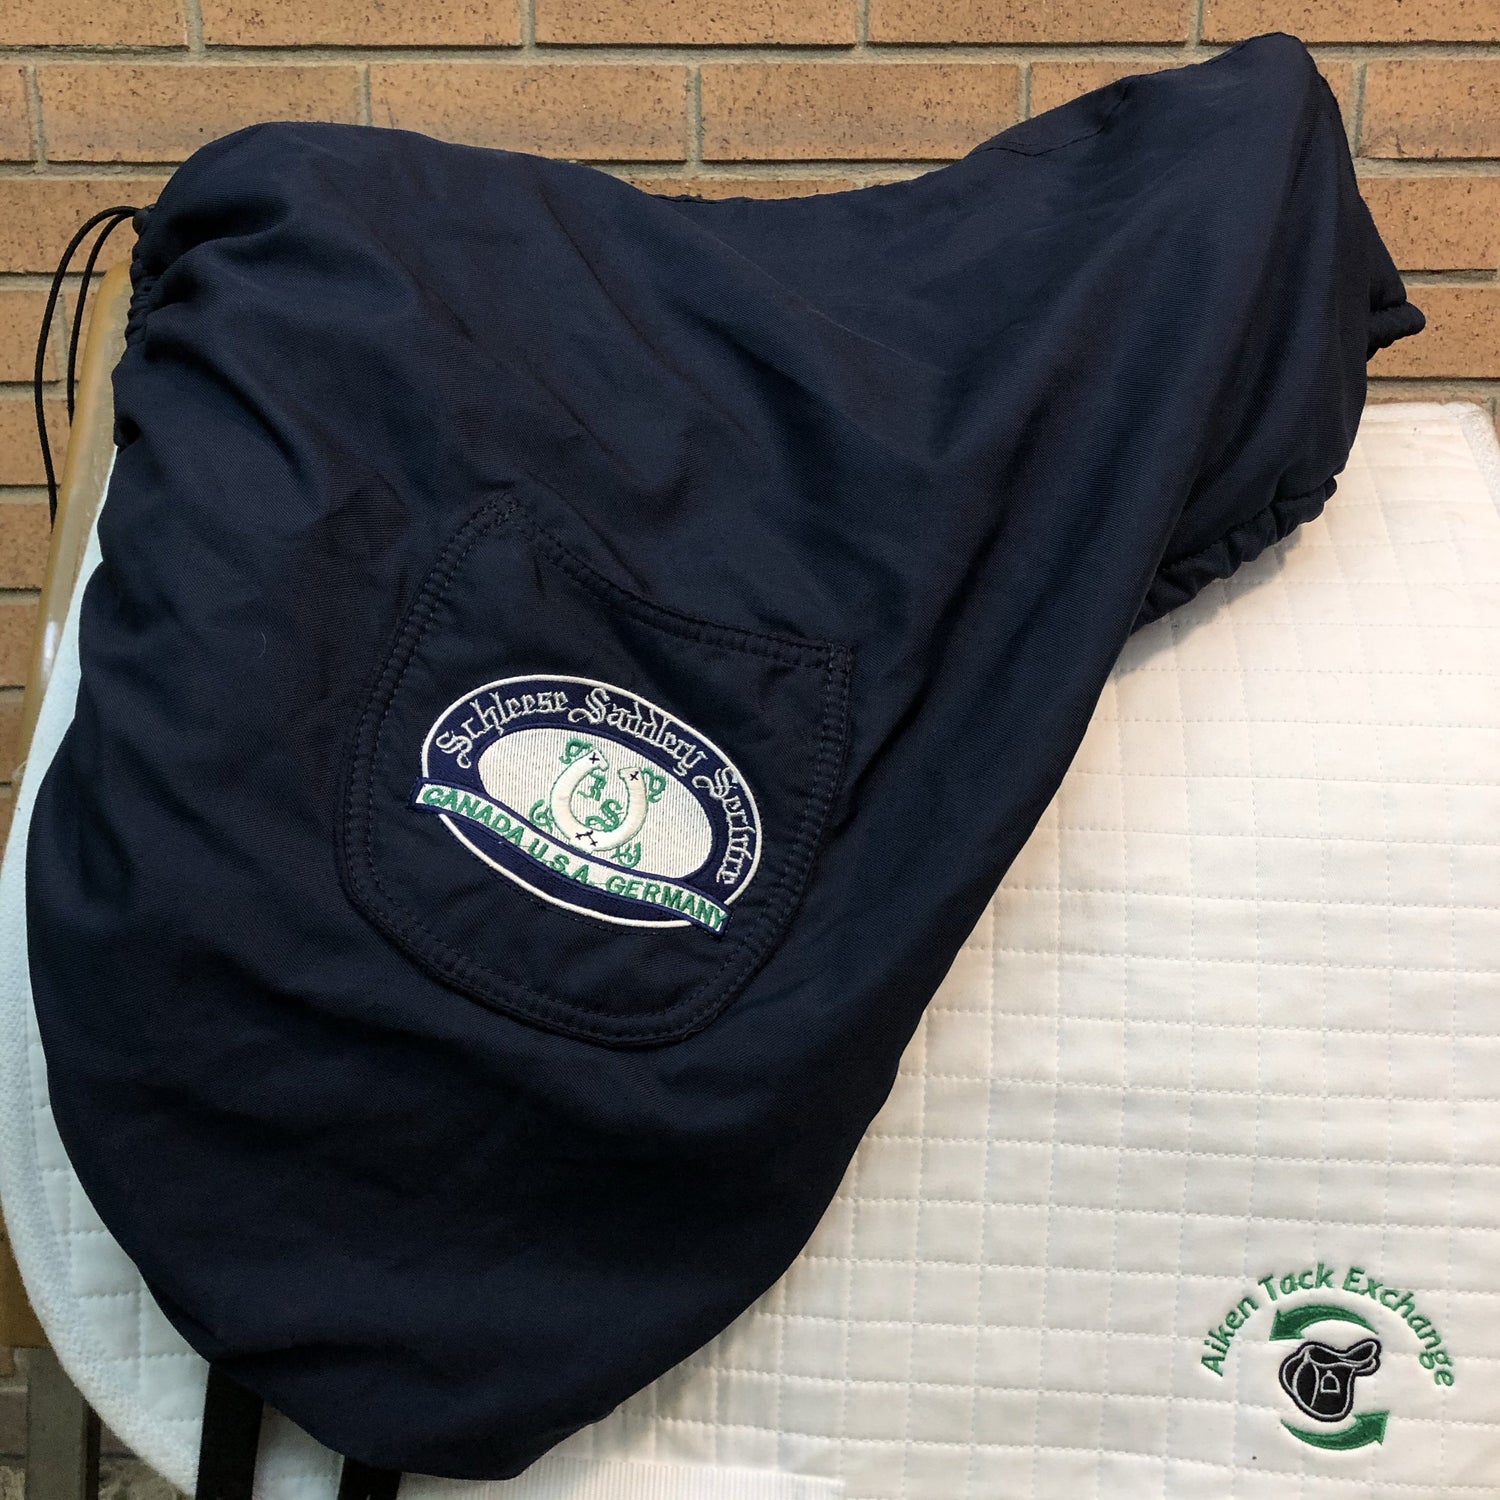 Saddle Covers & Carriers